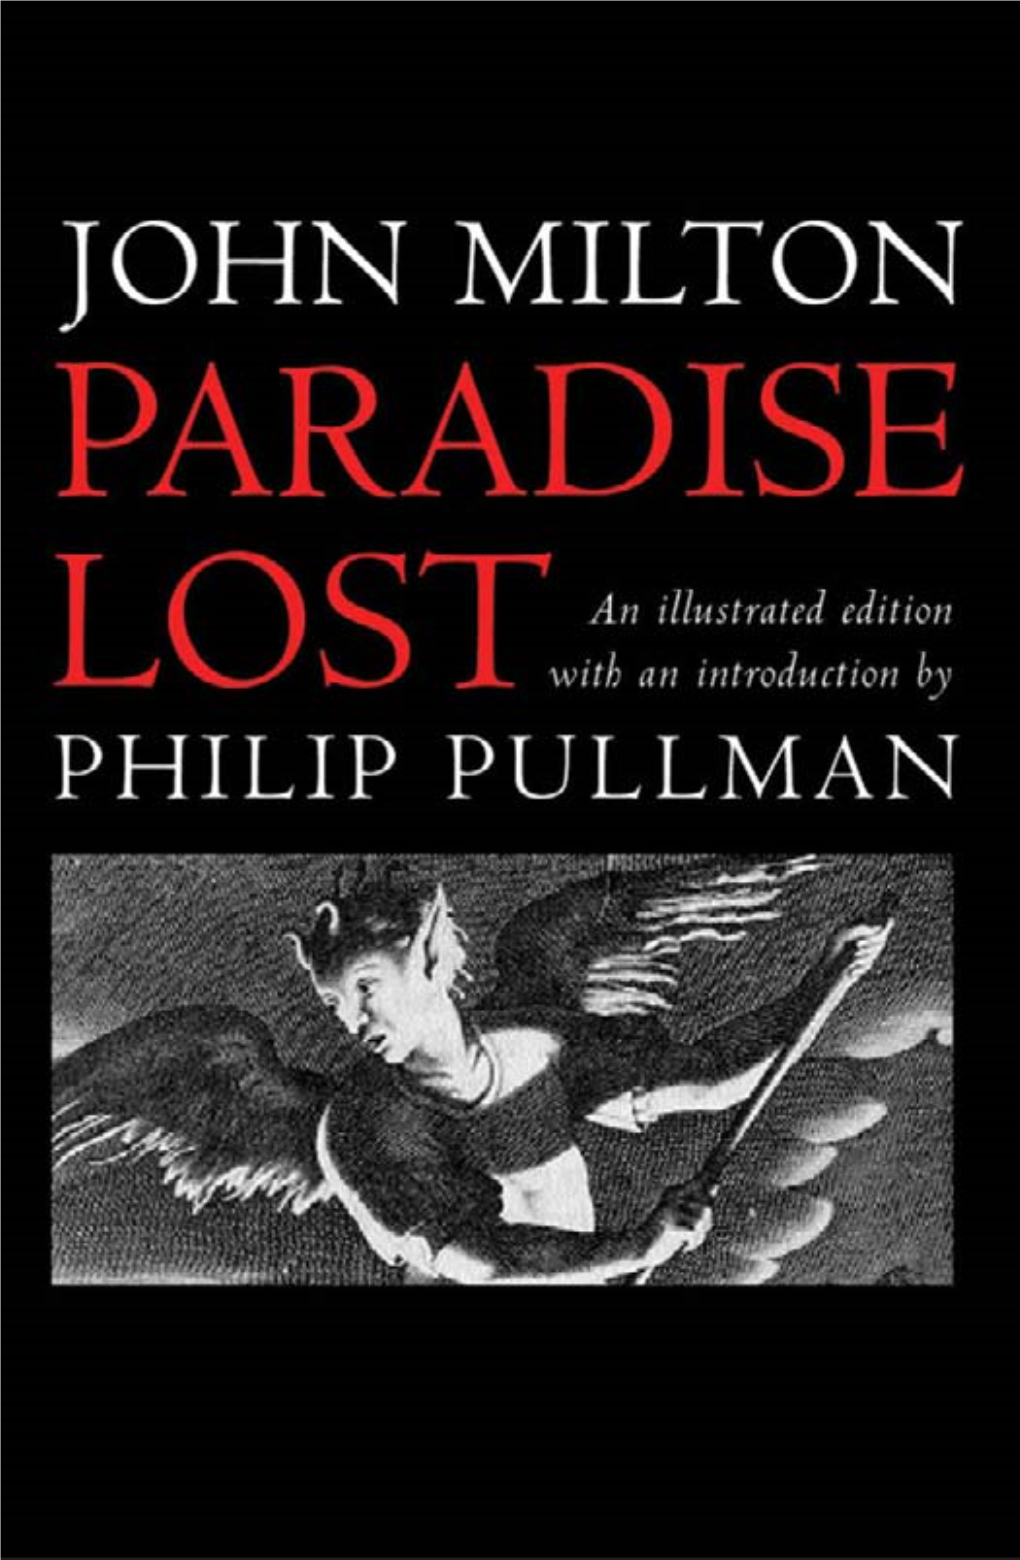 PARADISE LOST This Page Intentionally Left Blank JOHN MILTON PARADISE LOS T